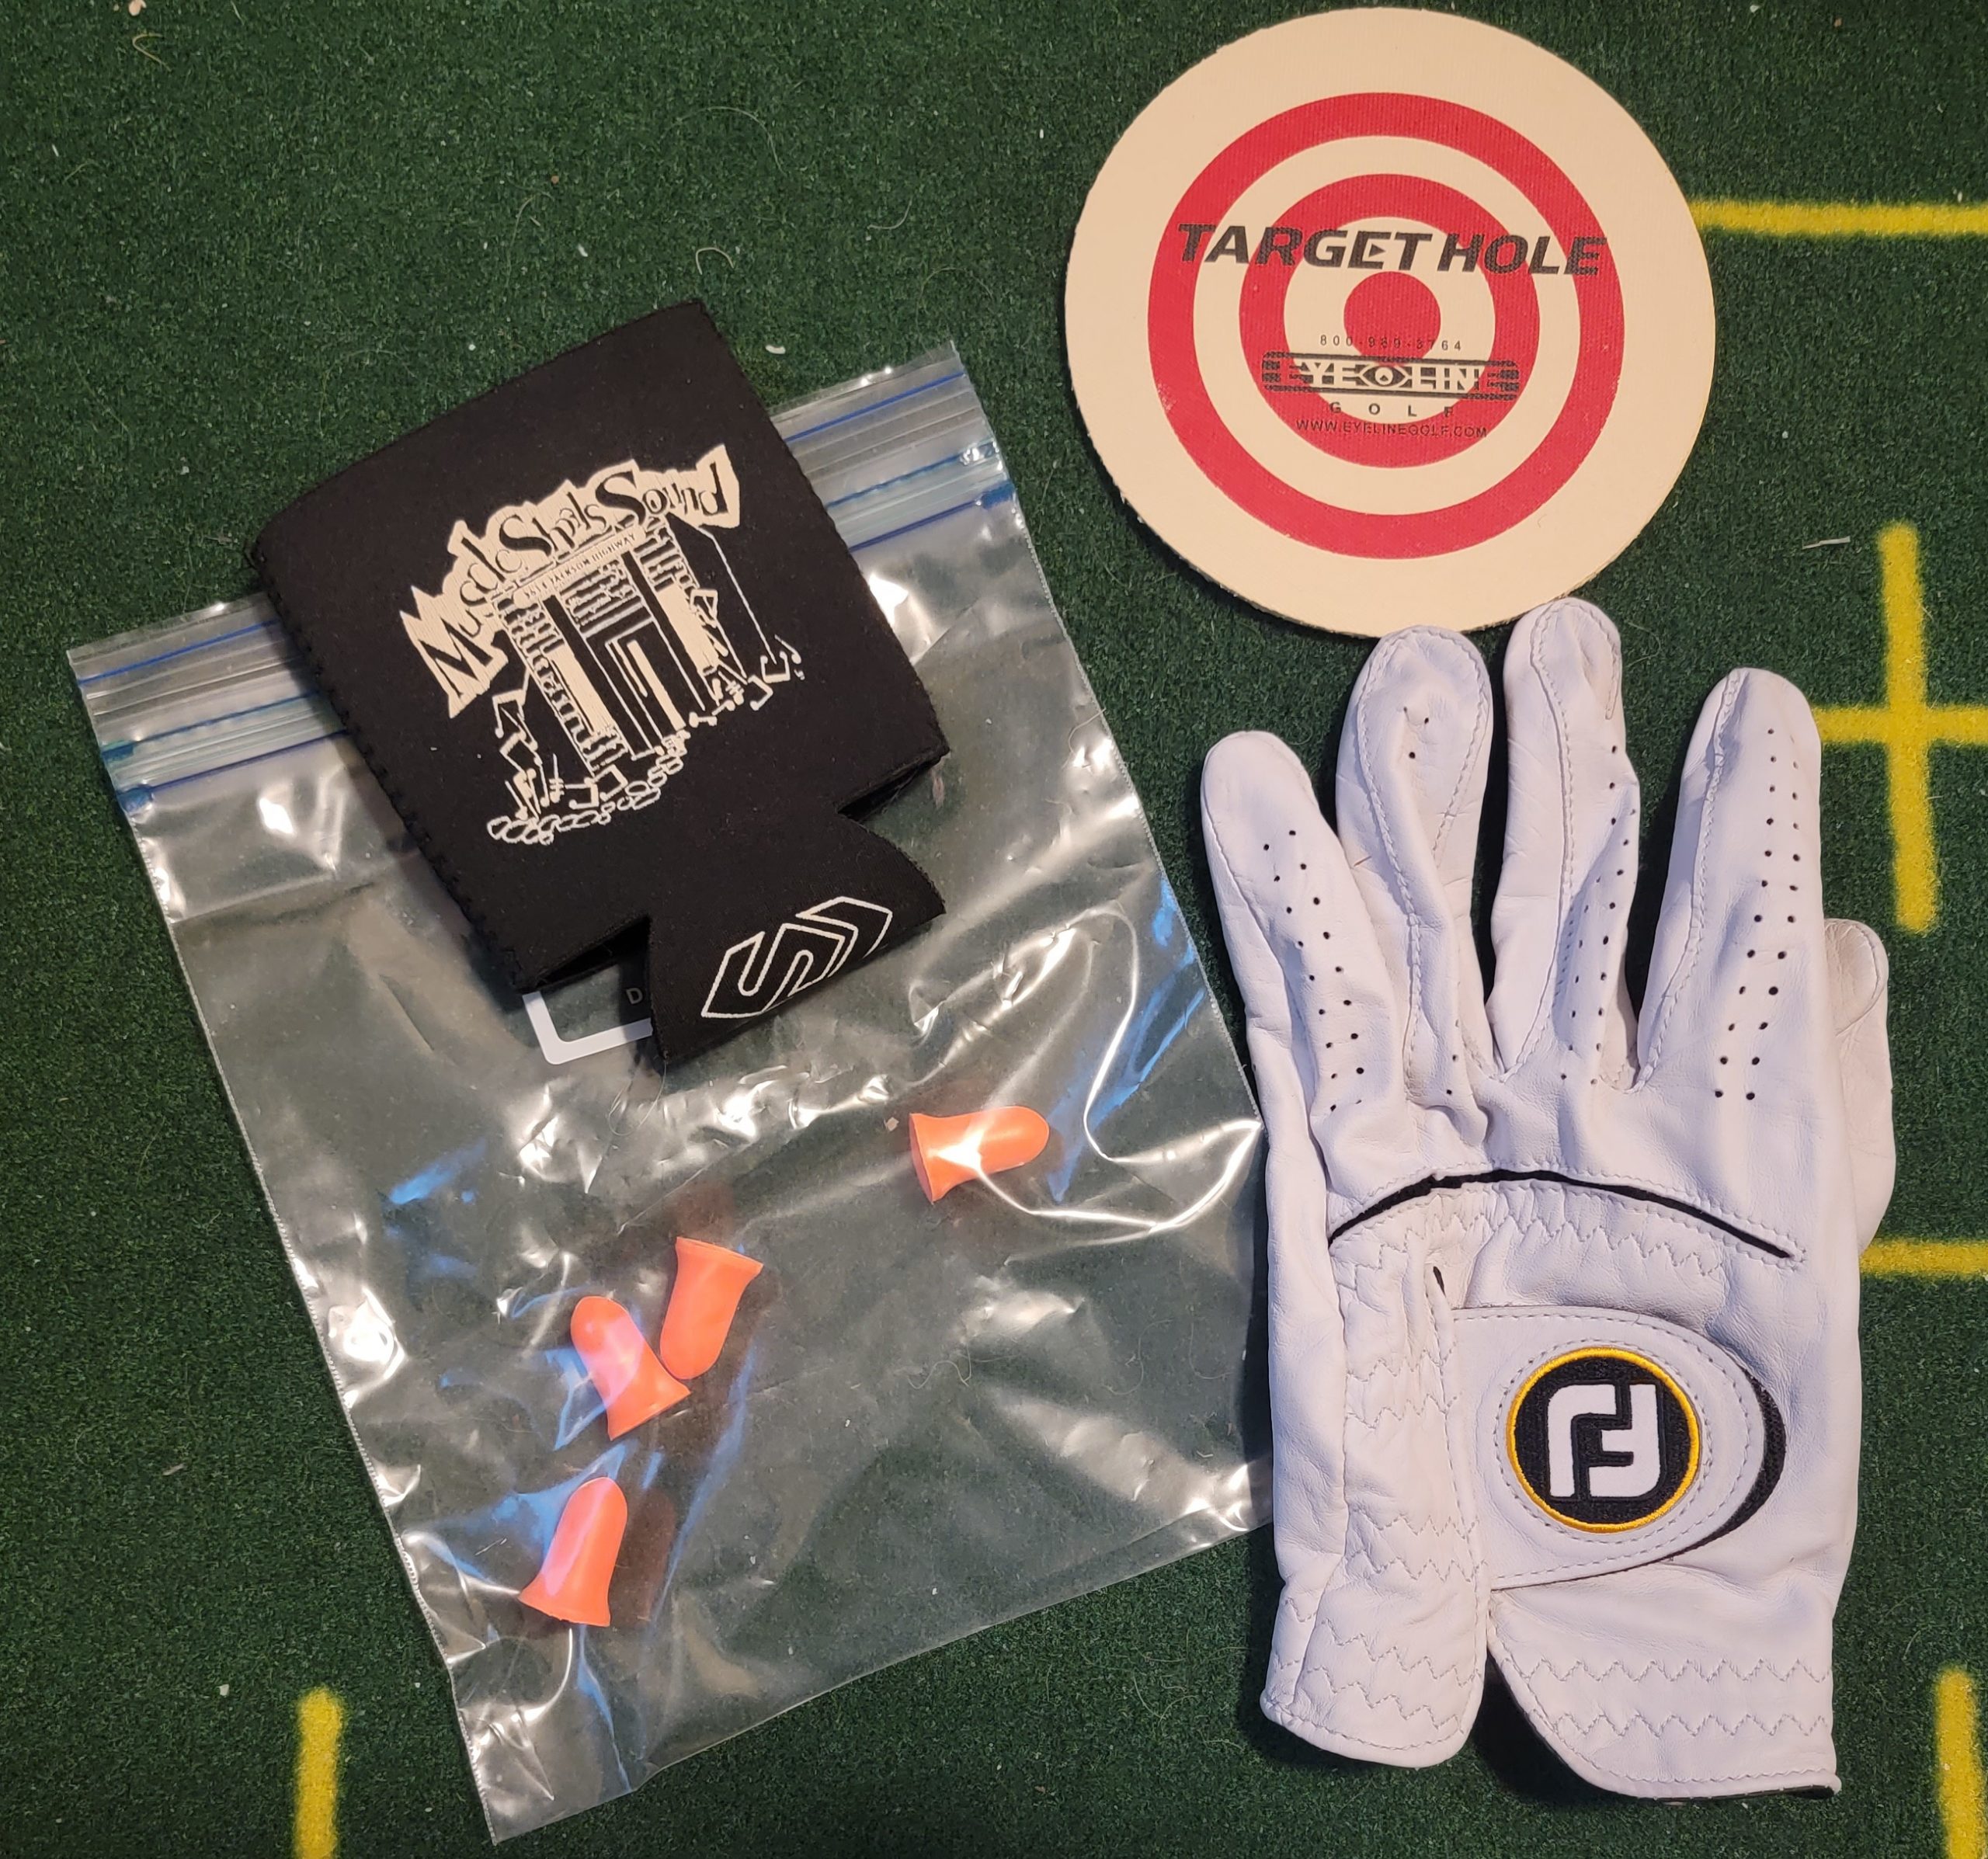 Old Duffer Golf image of golf accessories and newest glove